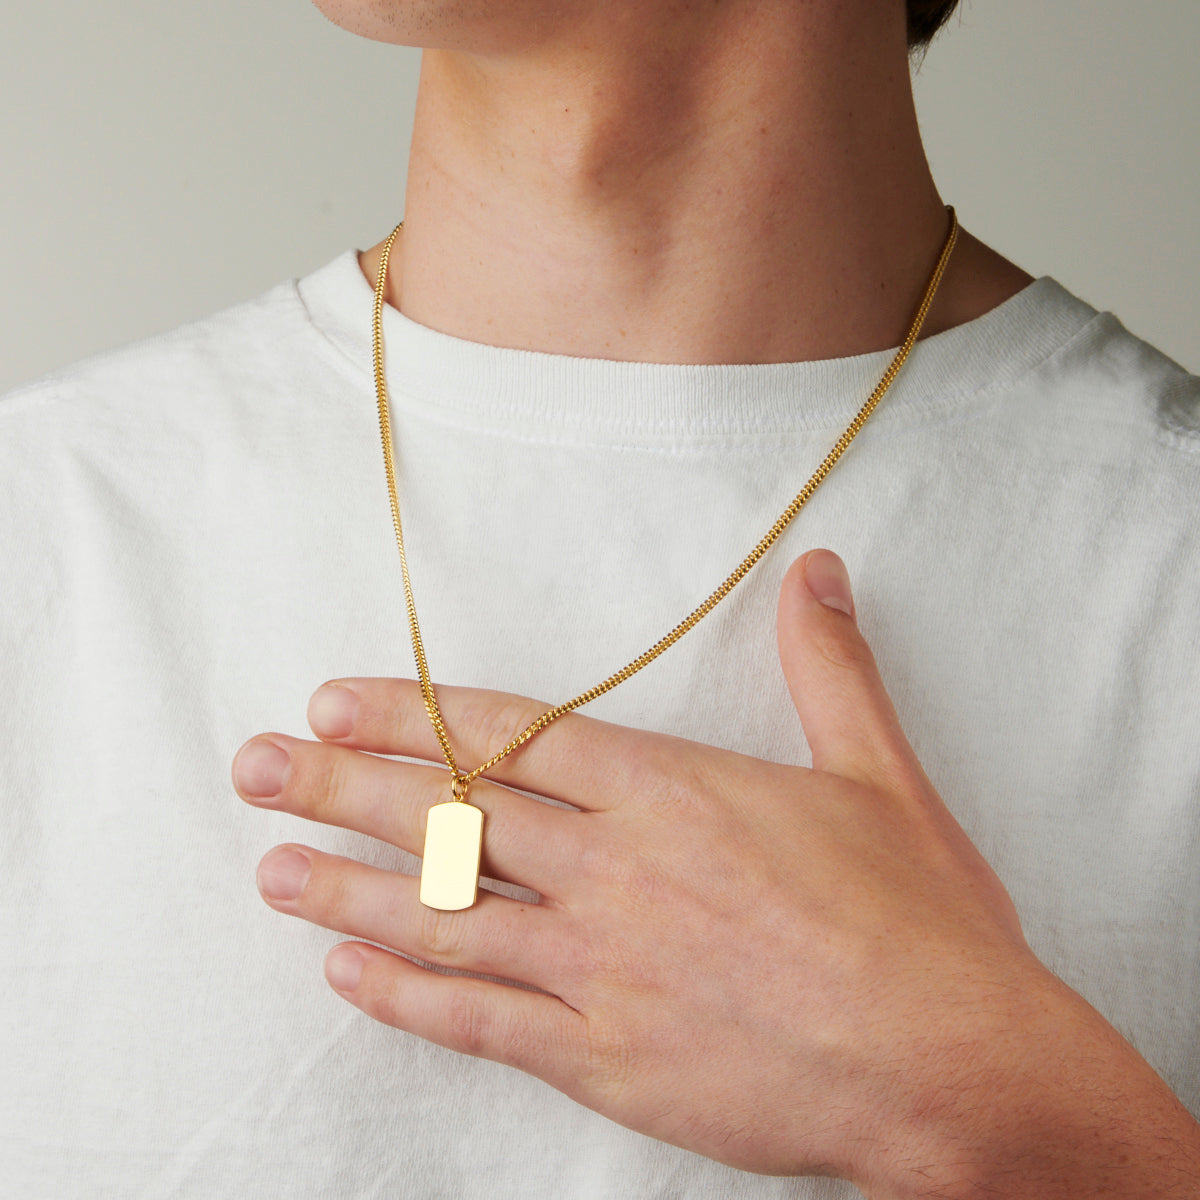 A person wearing the Classic Large Tag Pendant, with the pendant hanging on a 20" or 22" tub chain around their neck. The pendant is available in sterling silver, gold vermeil, or 14kt yellow gold and can be engraved with custom font and text. The person in the image is dressed in casual attire and the pendant adds a touch of elegance and personalization to their outfit.